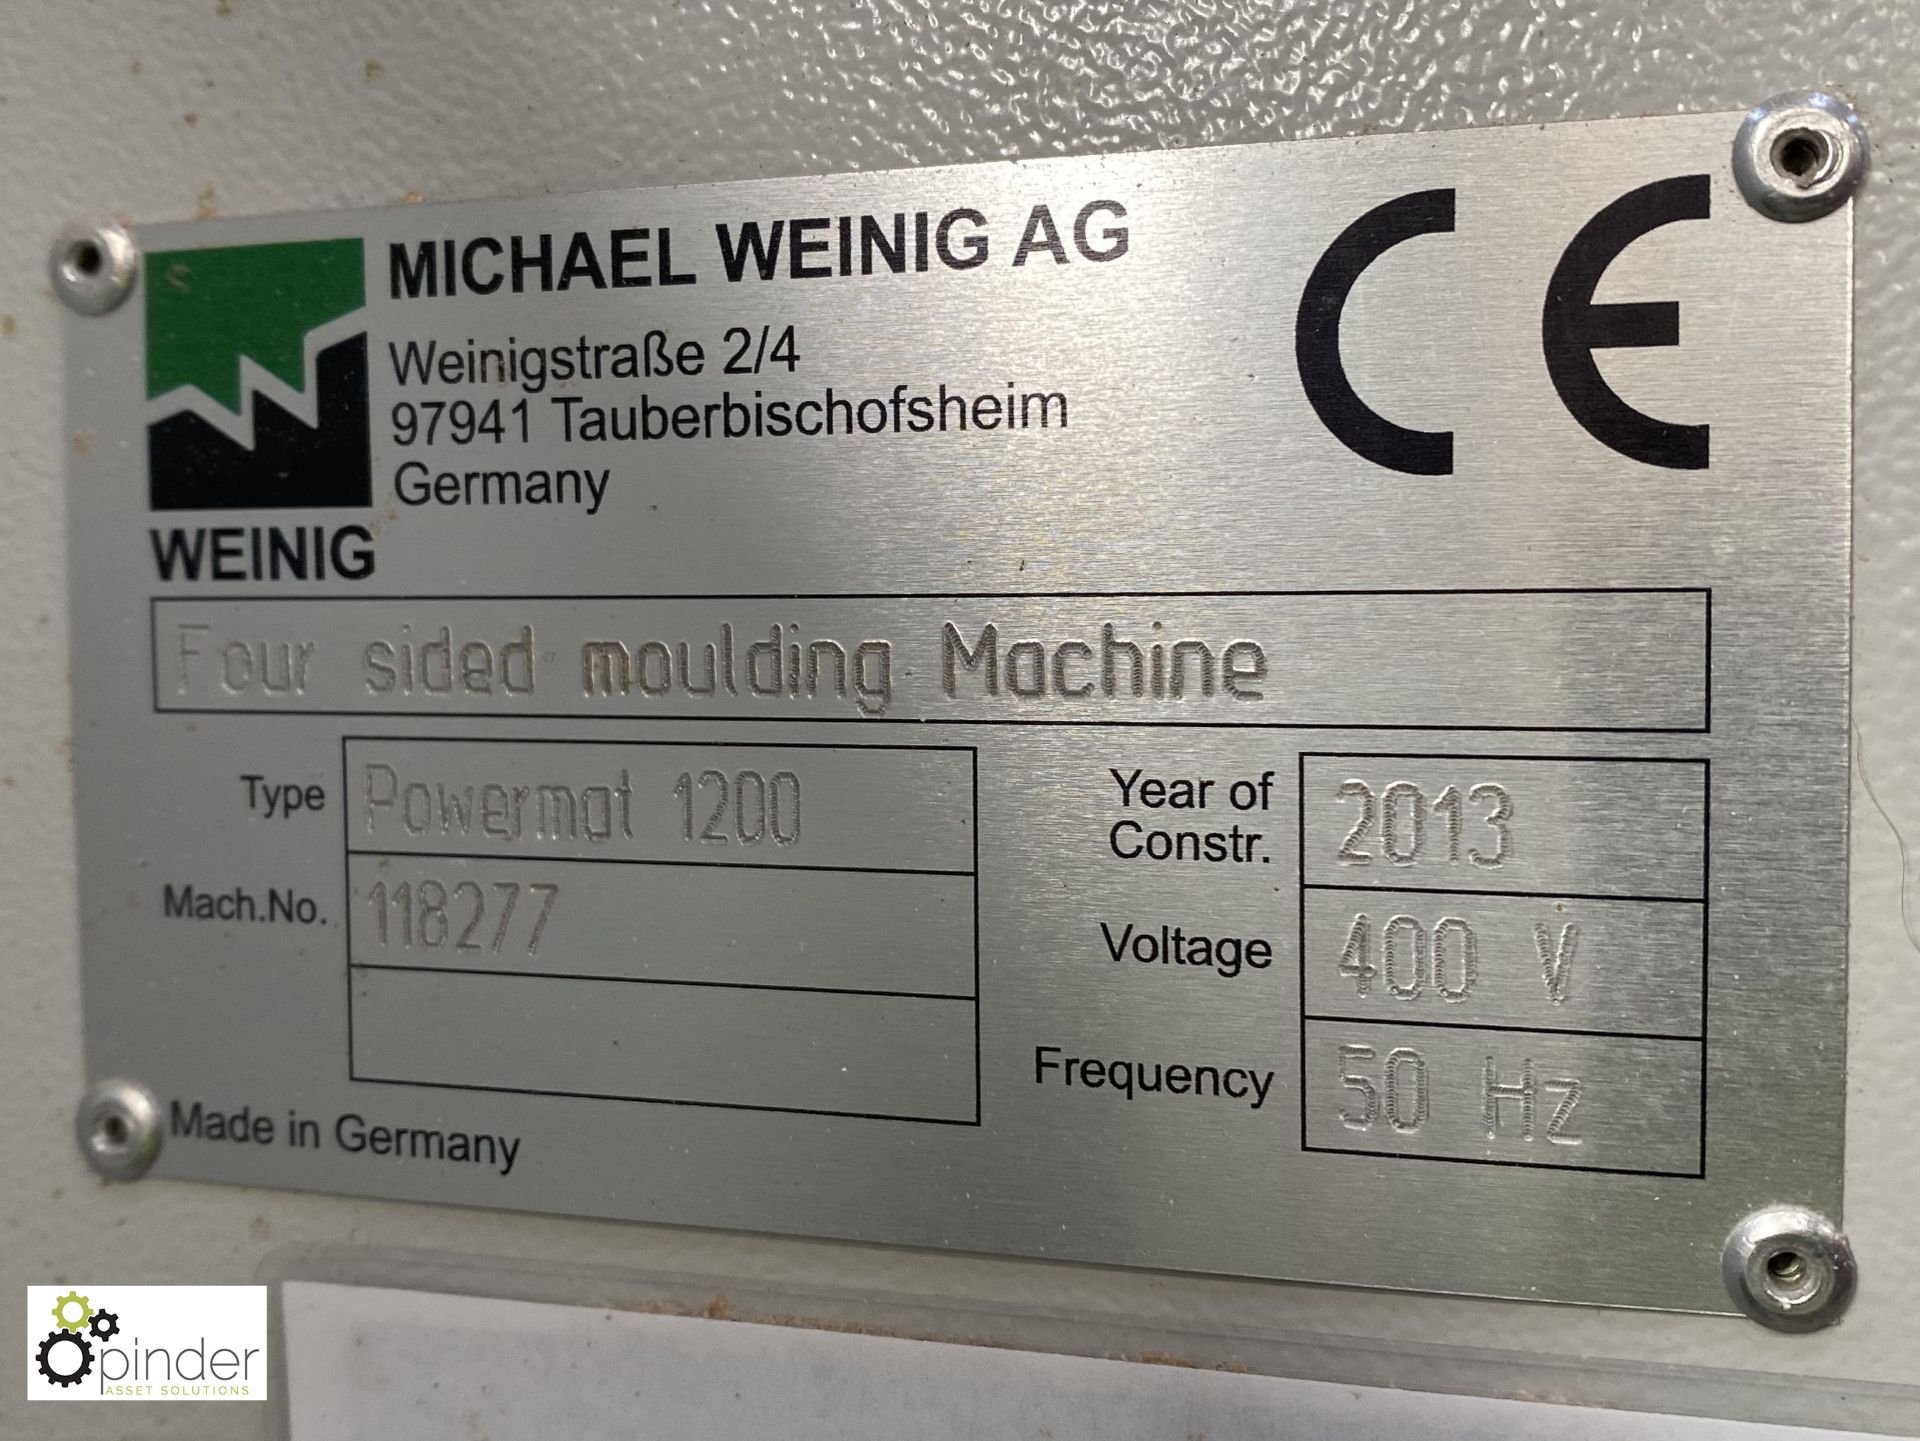 Weinig Powermat 1200 4-sided Moulder, year 2013, s - Image 4 of 13